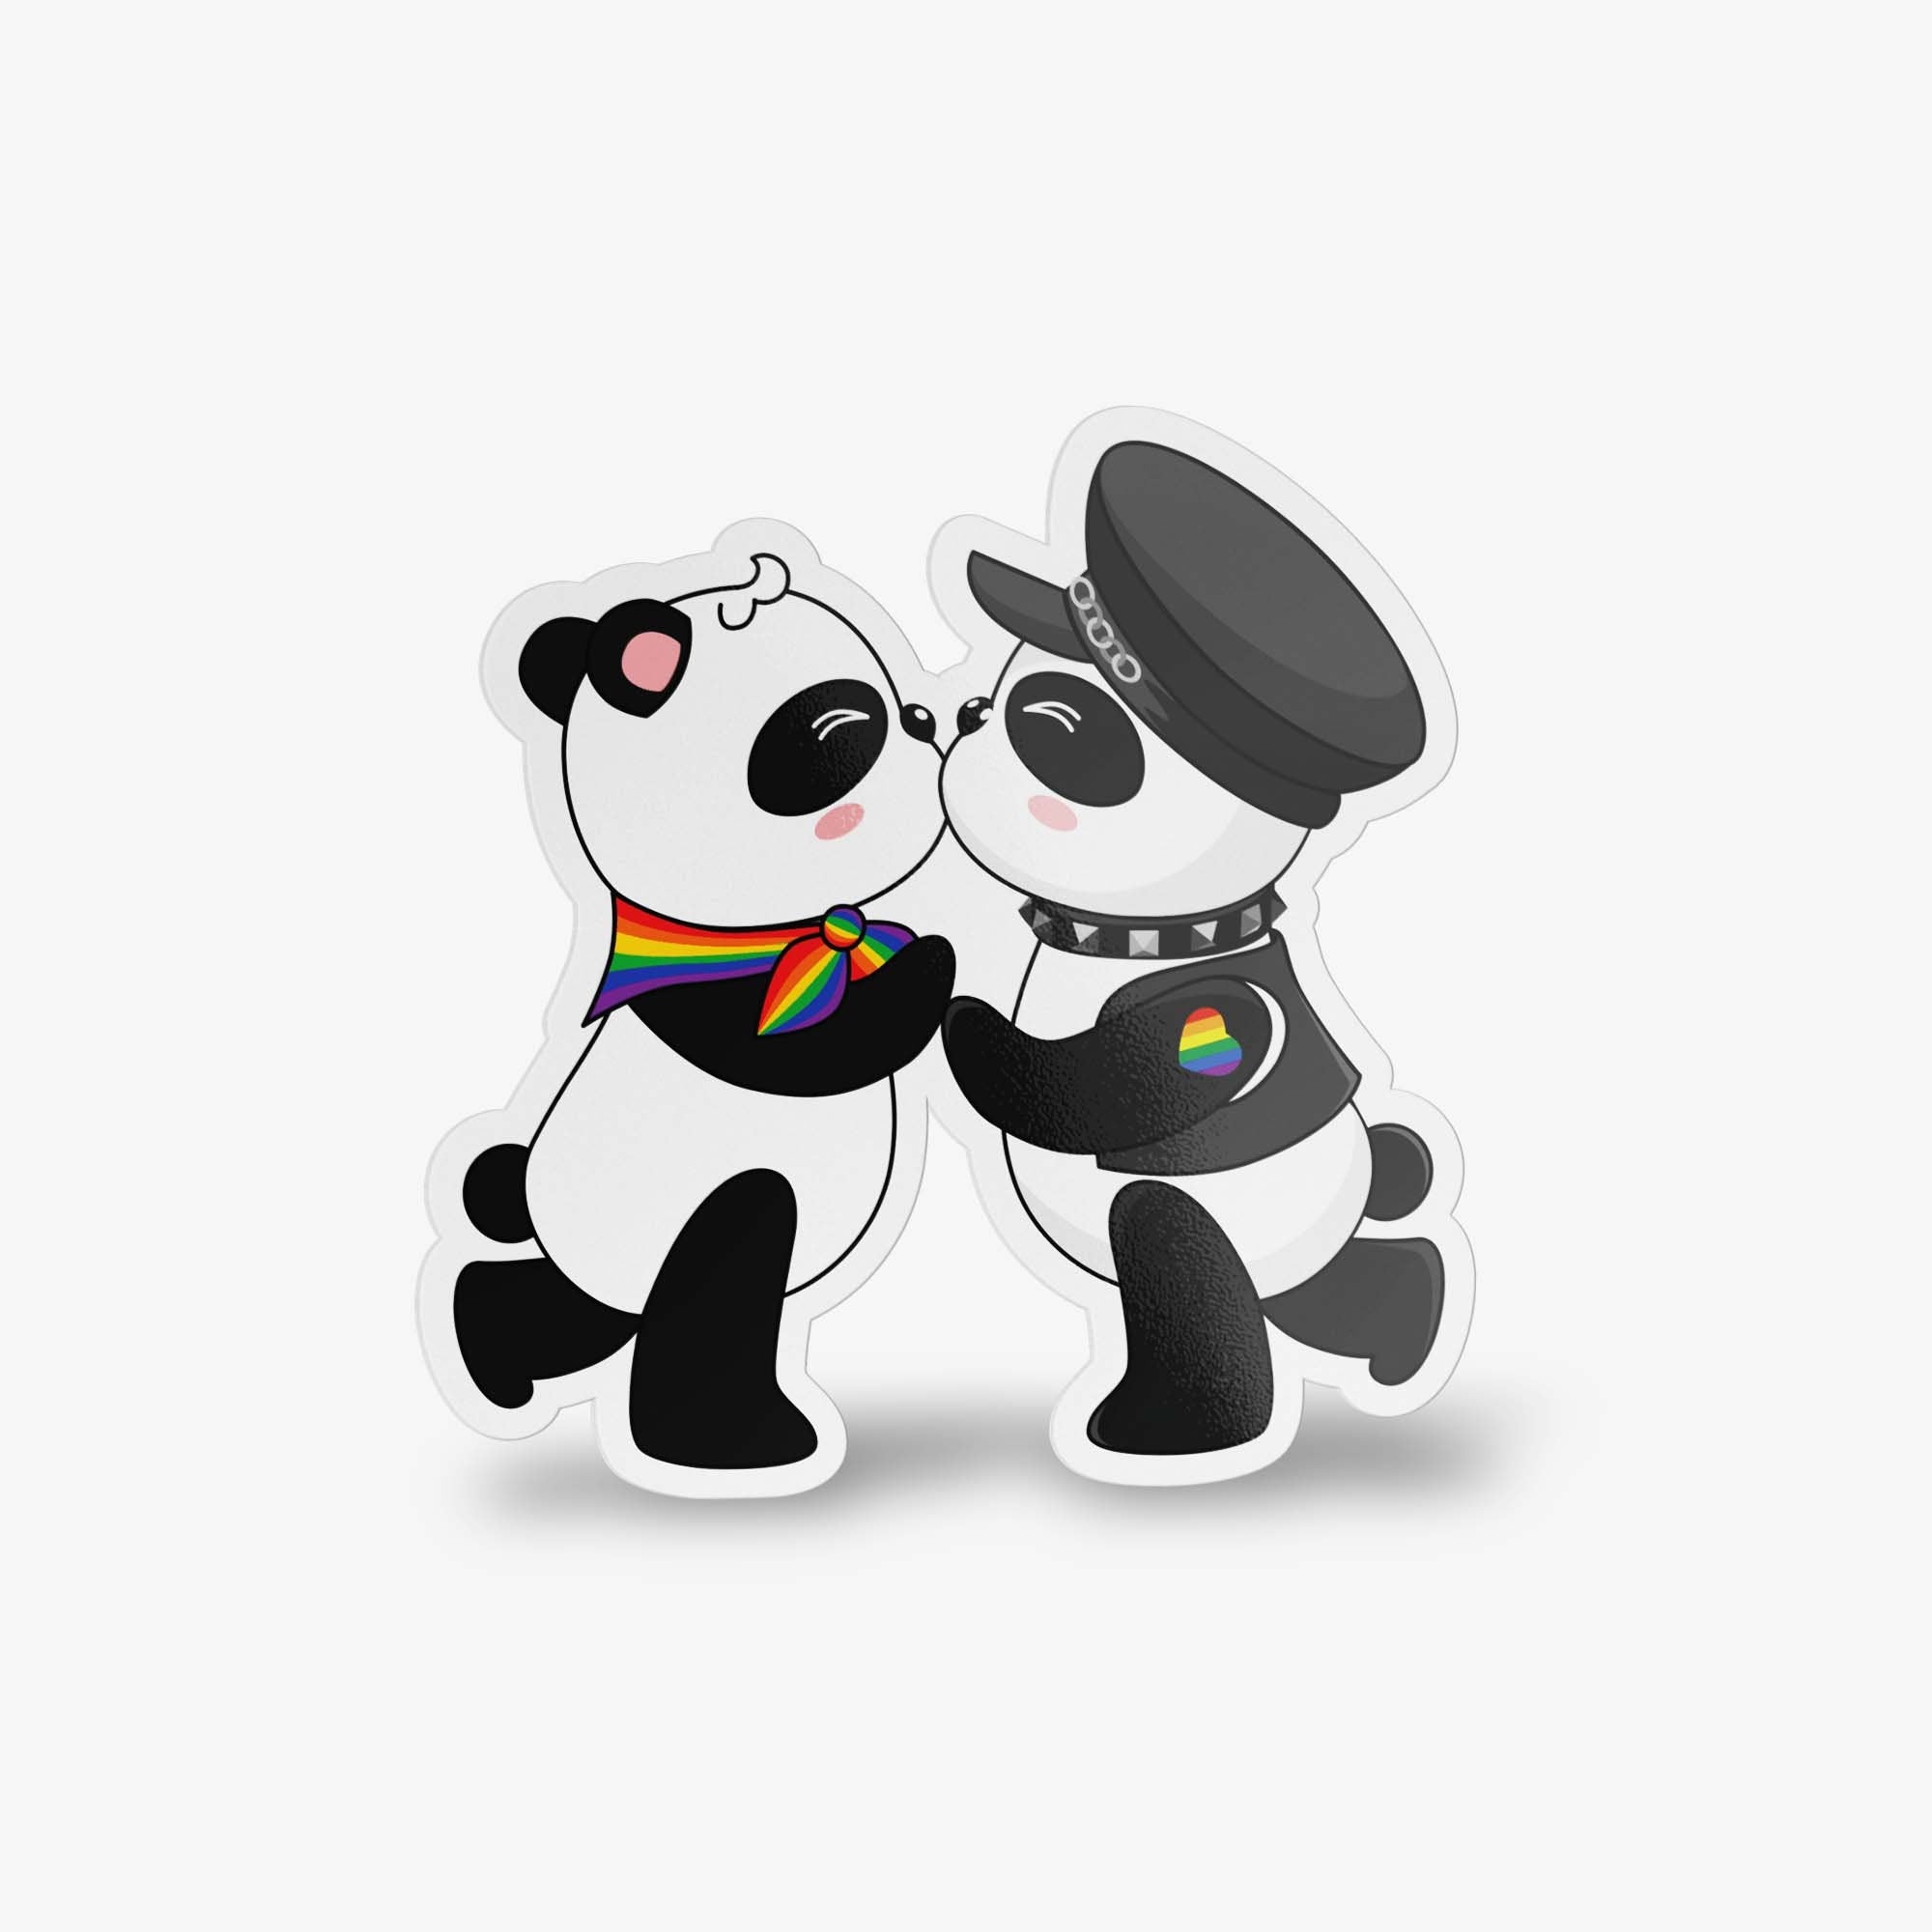 Gay Pride Stickers, Kawaii Panda, Stickers Laptop, Queer Stickers, Gay Cute, Pride Stickers, LGBT stickers, LGBT Gifts, Queer Gift